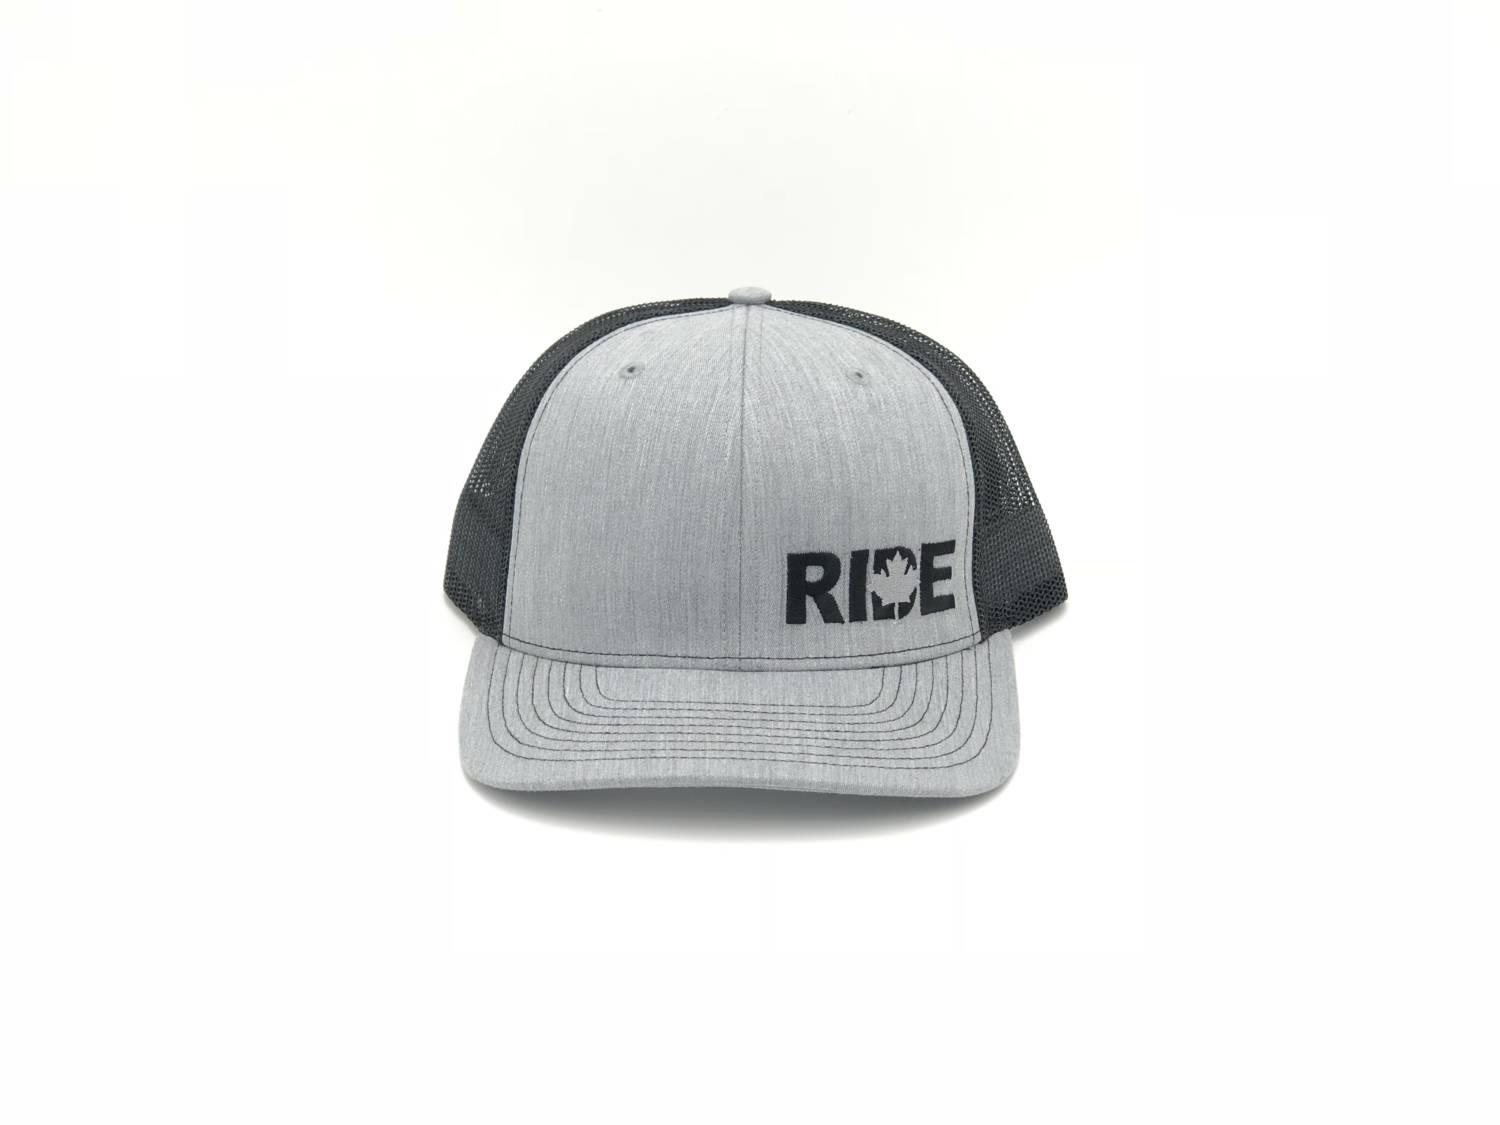 Ride Canada Night Out Embroidered Snapback Trucker Hat Heather Gray/Black